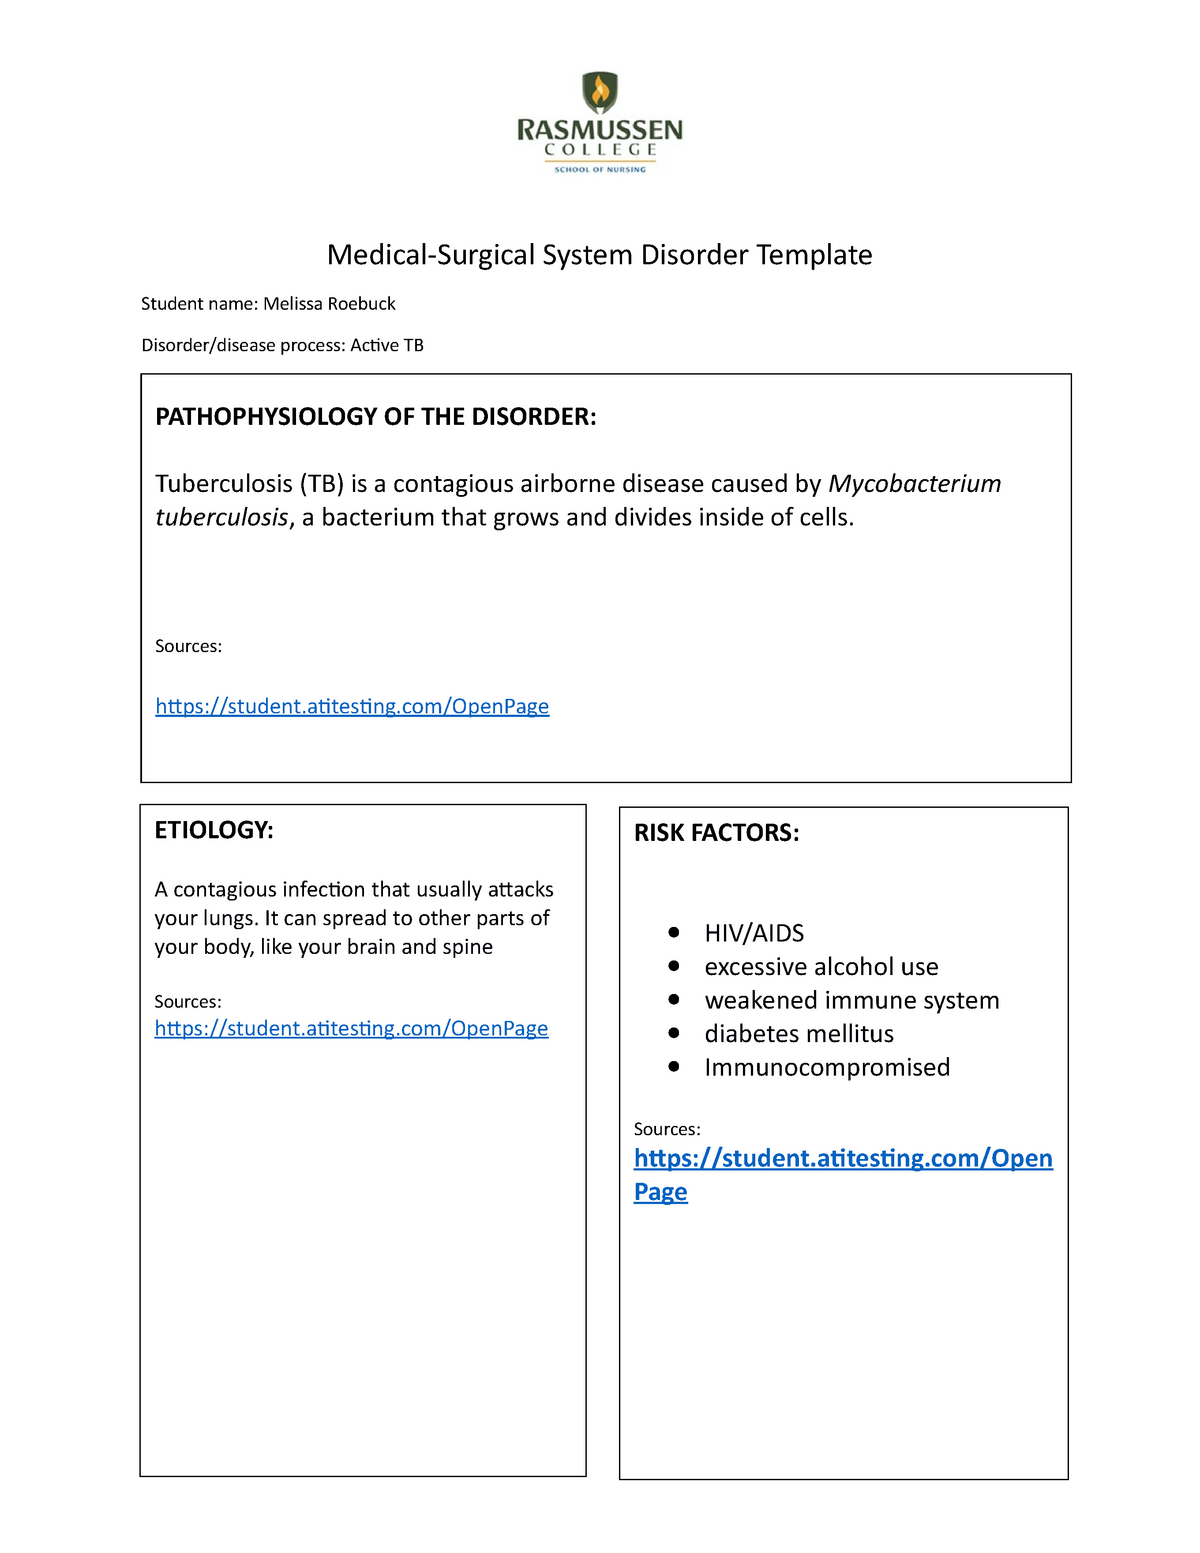 system-disorder-active-tb-06192020-medical-surgical-system-disorder